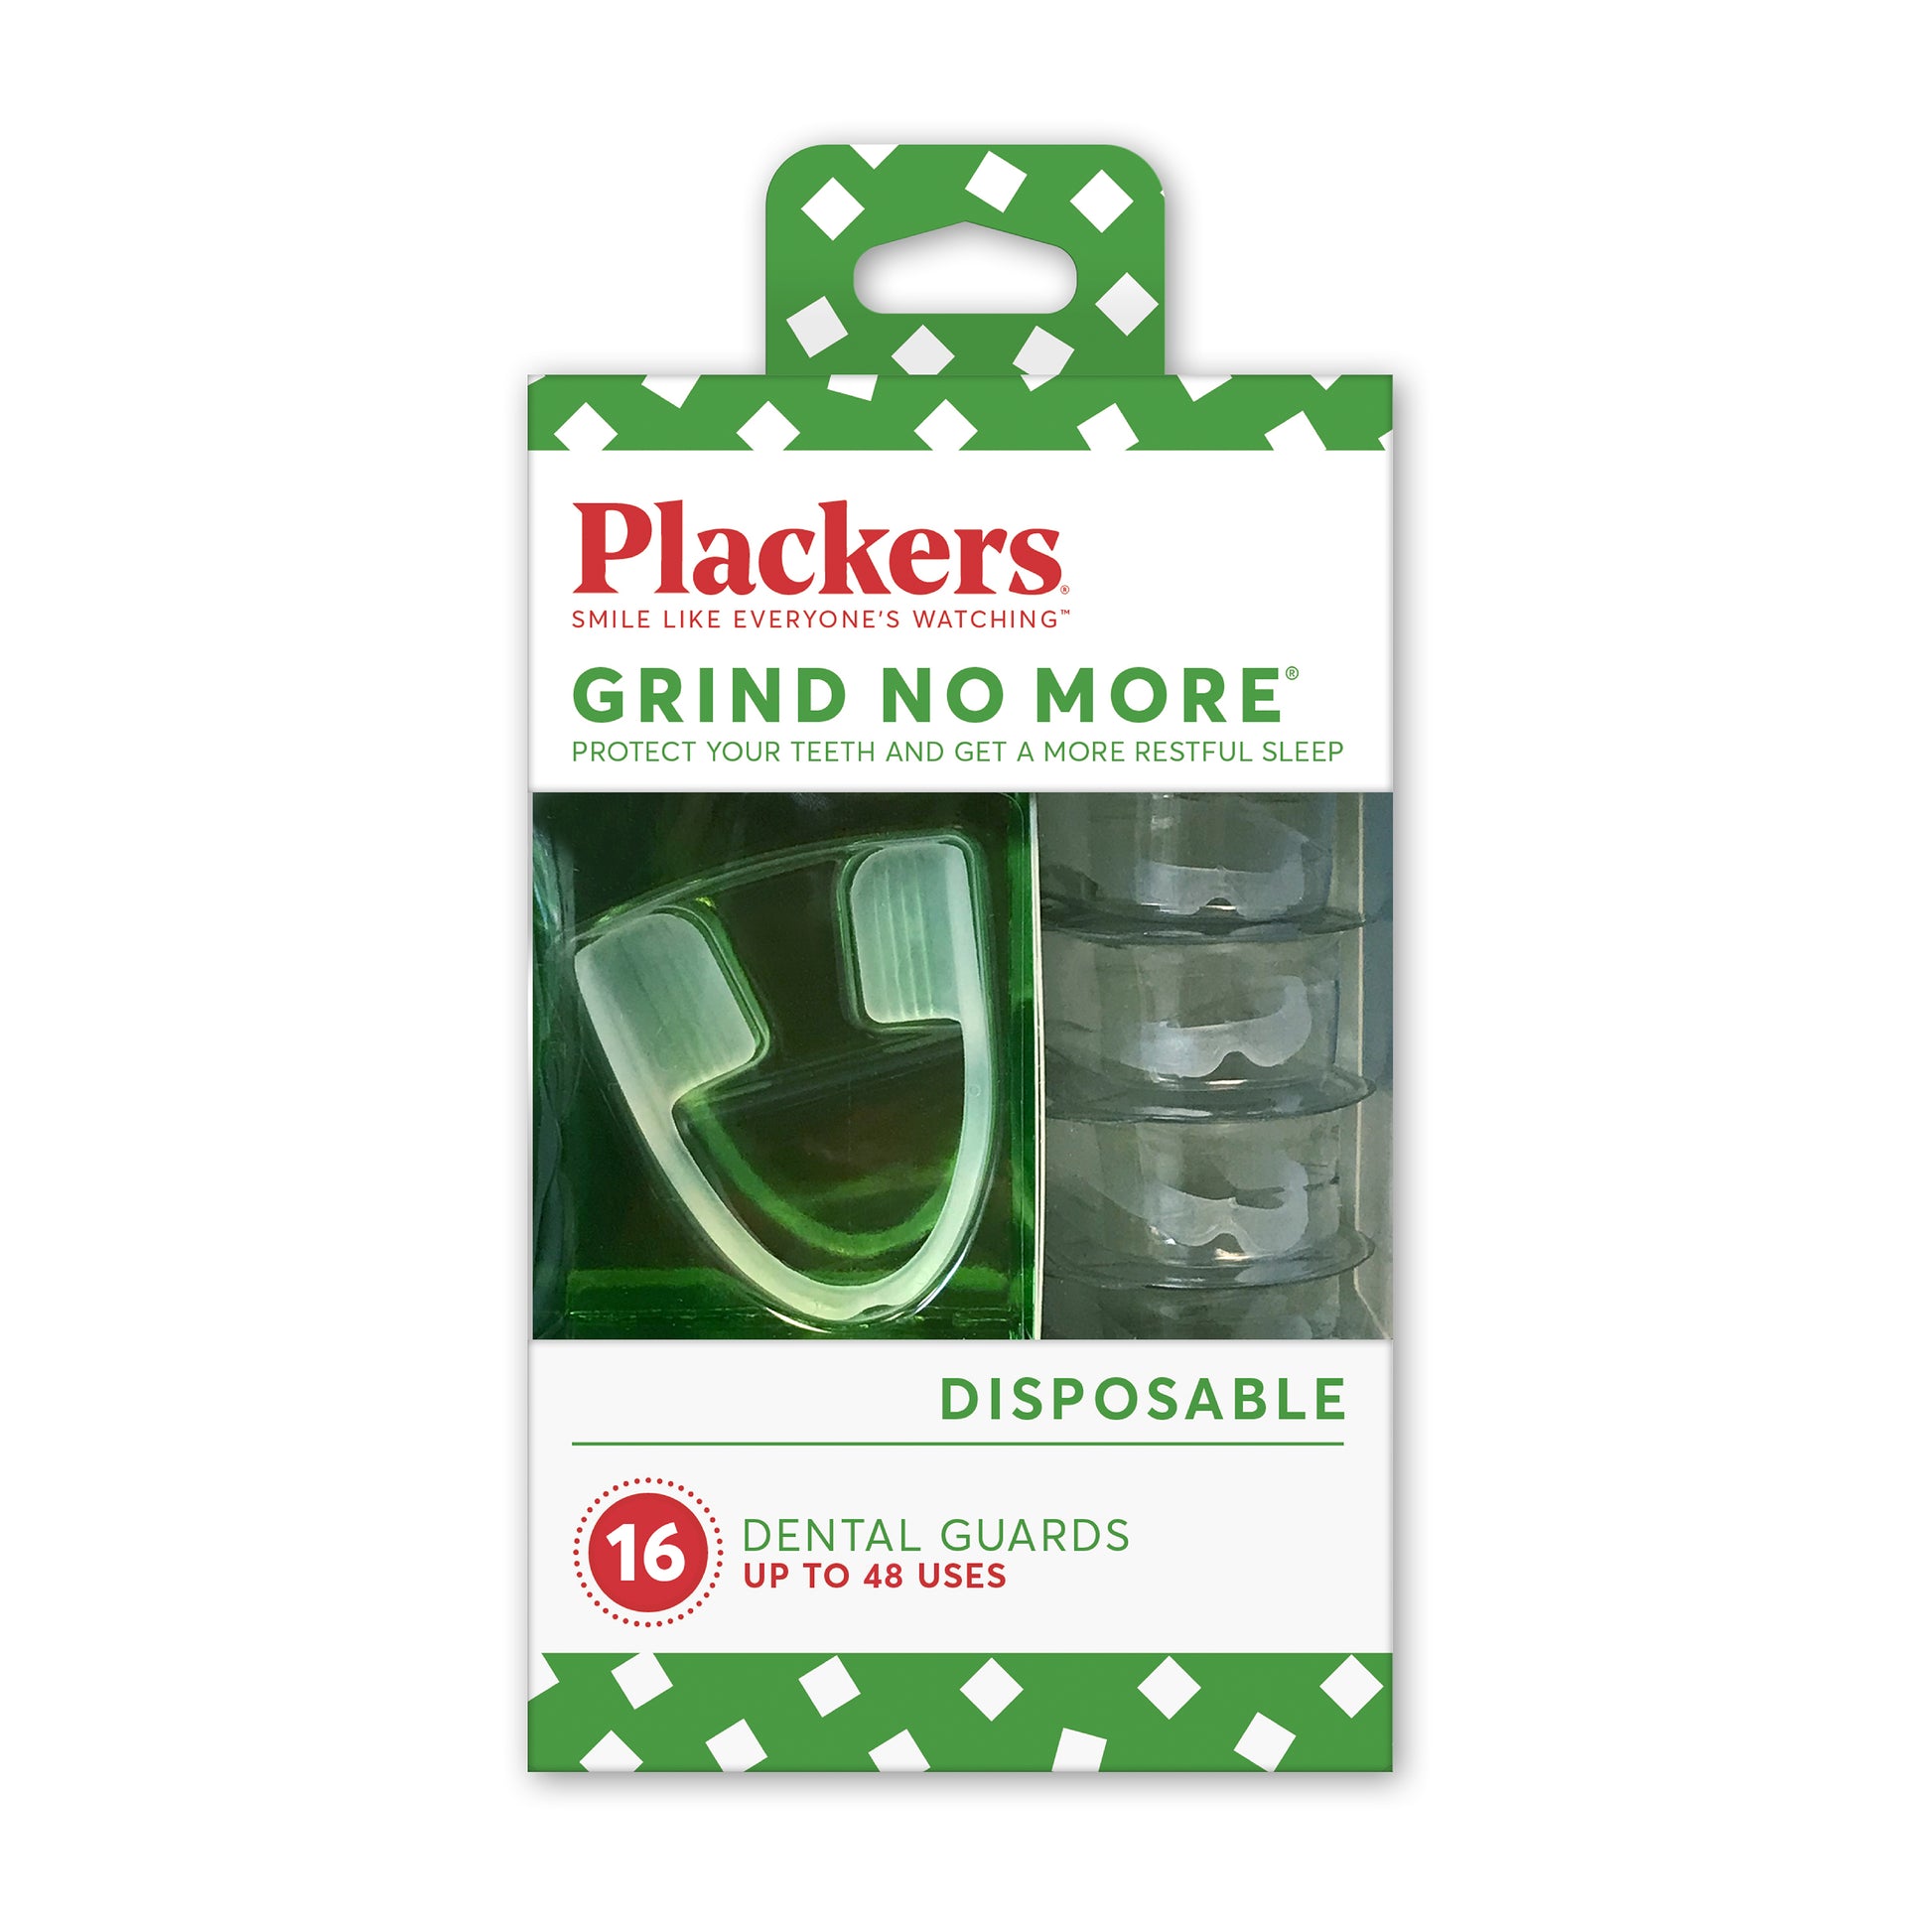 16 pack of Plackers Grind No More Night Guard. Protect your teeth and get a more restful sleep. Up to 48 uses